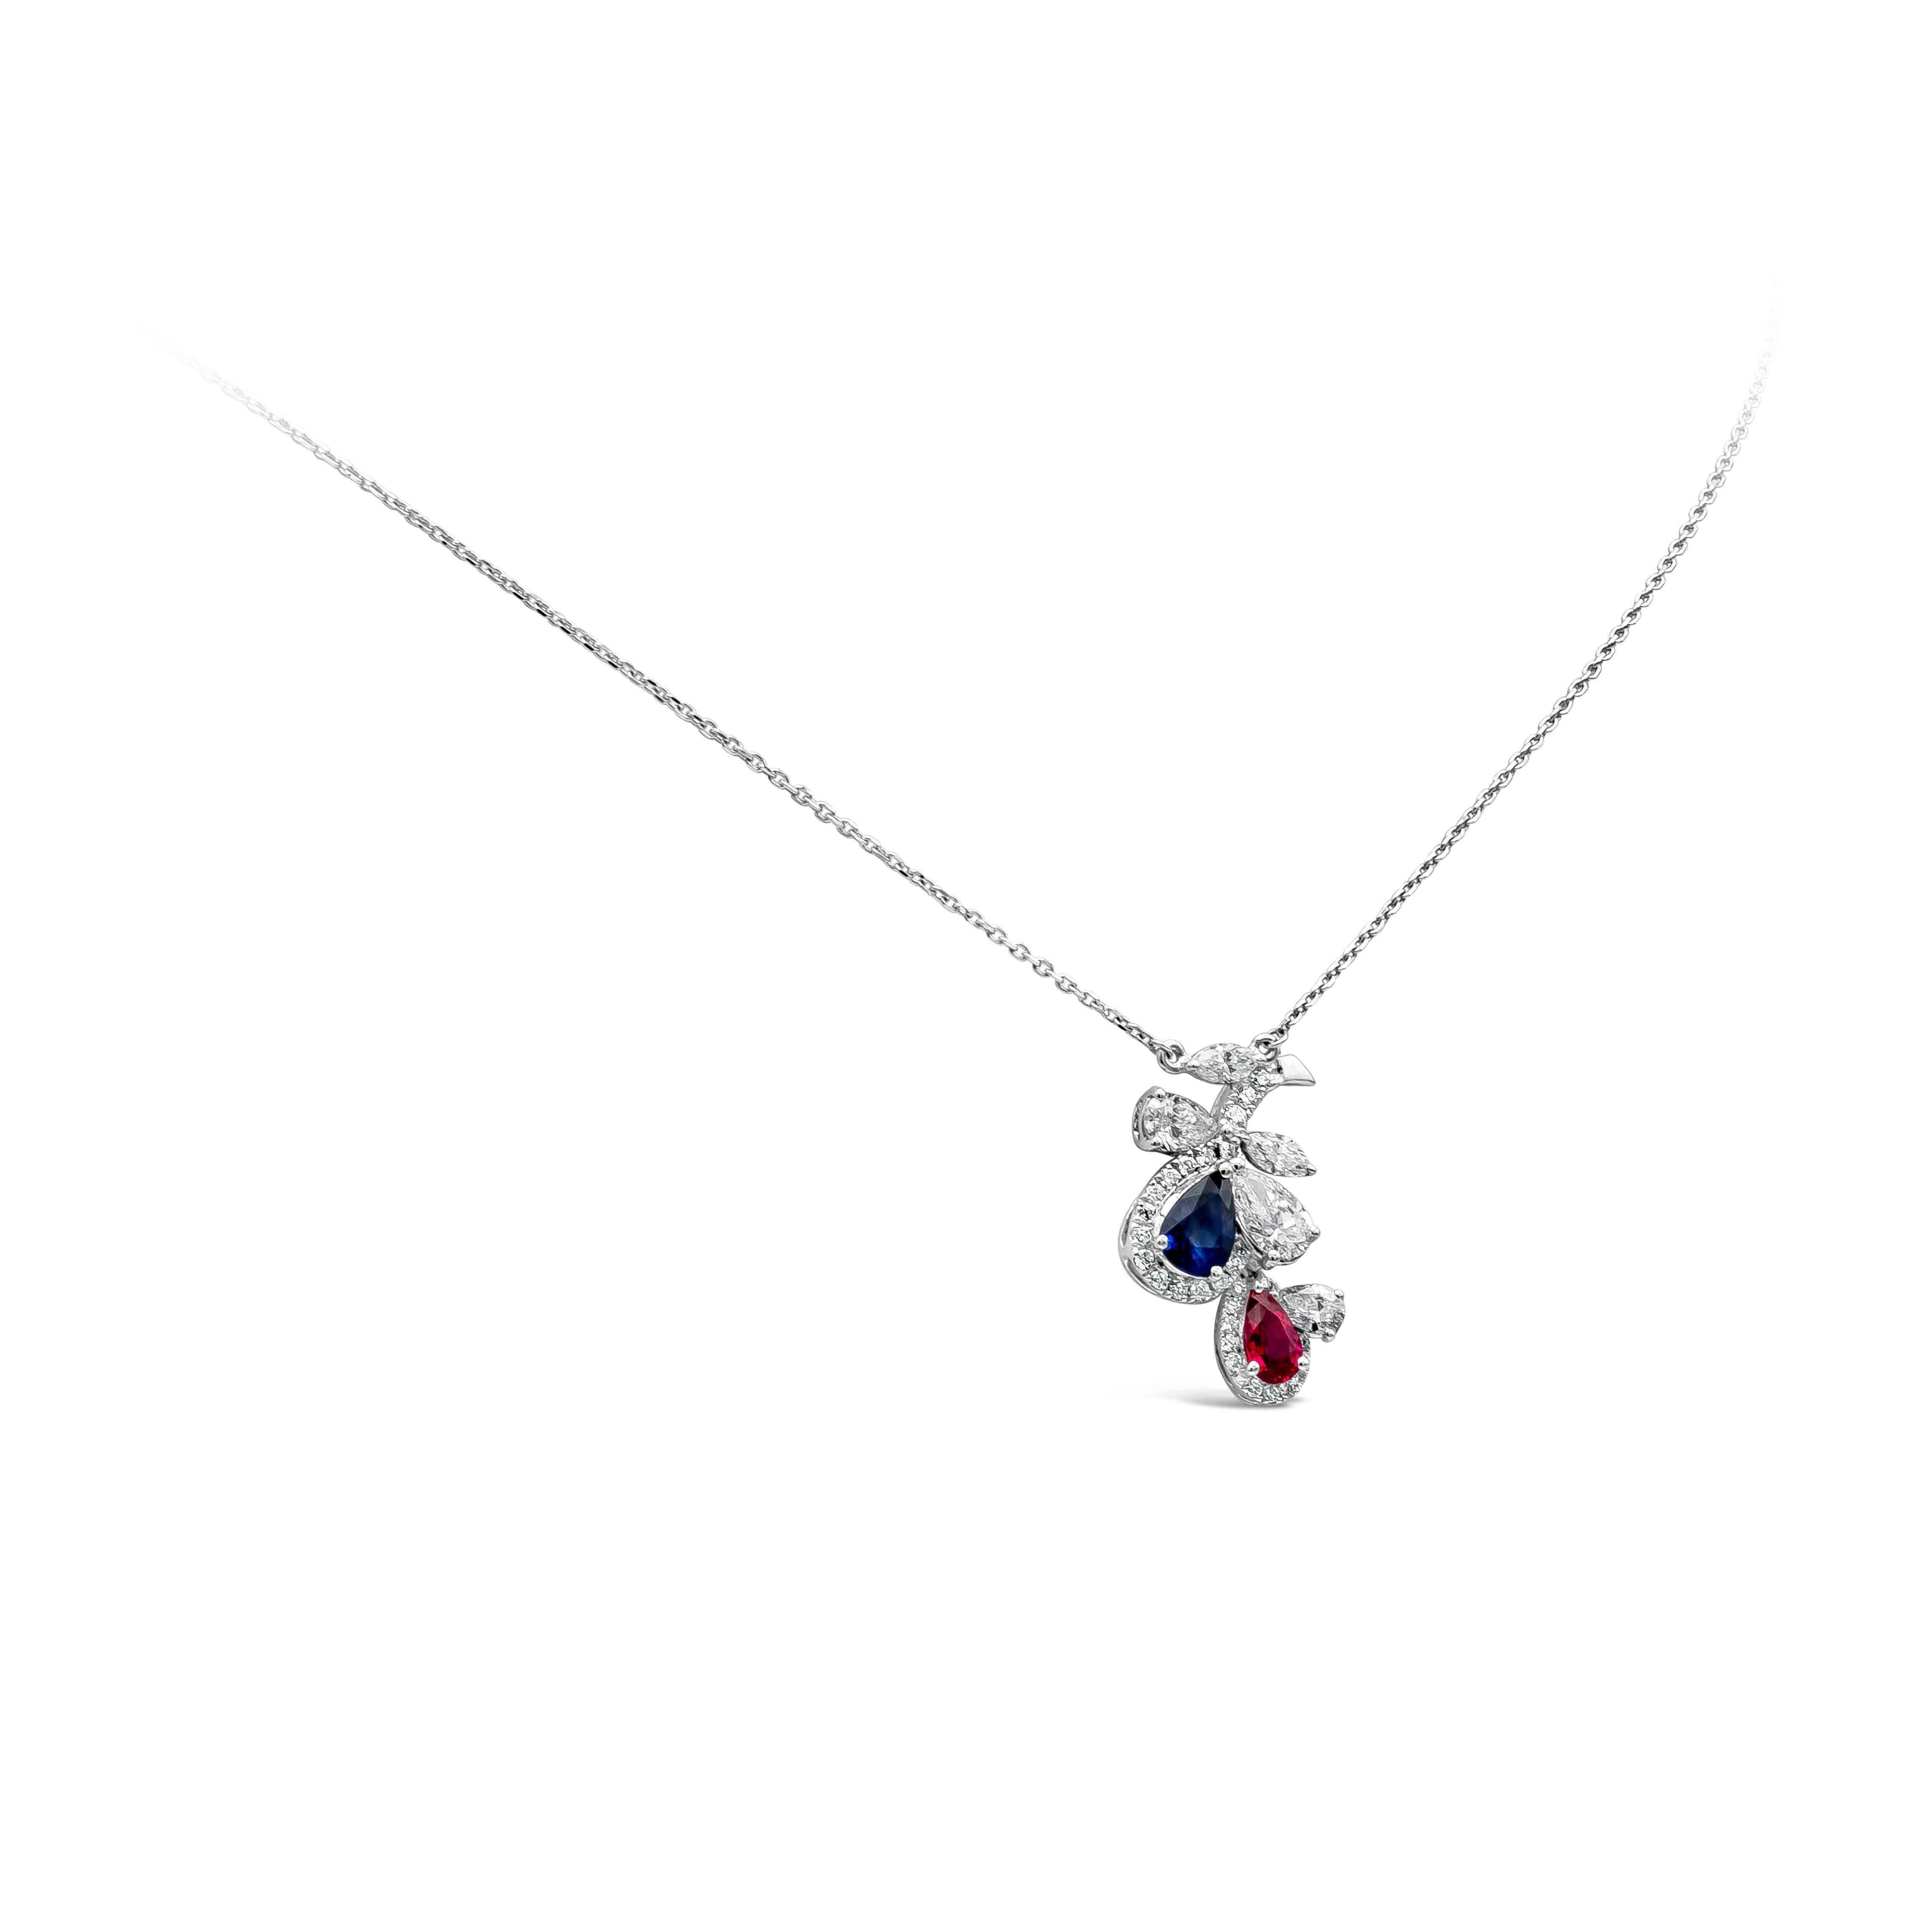 A gorgeous necklace featuring a pear and marquise cut diamond, blue sapphires and red rubies in pear shape set in a flower. The flower is set with a pear and marquise cut diamond that weighs about 0.70 carat total, approximately FG color, VS